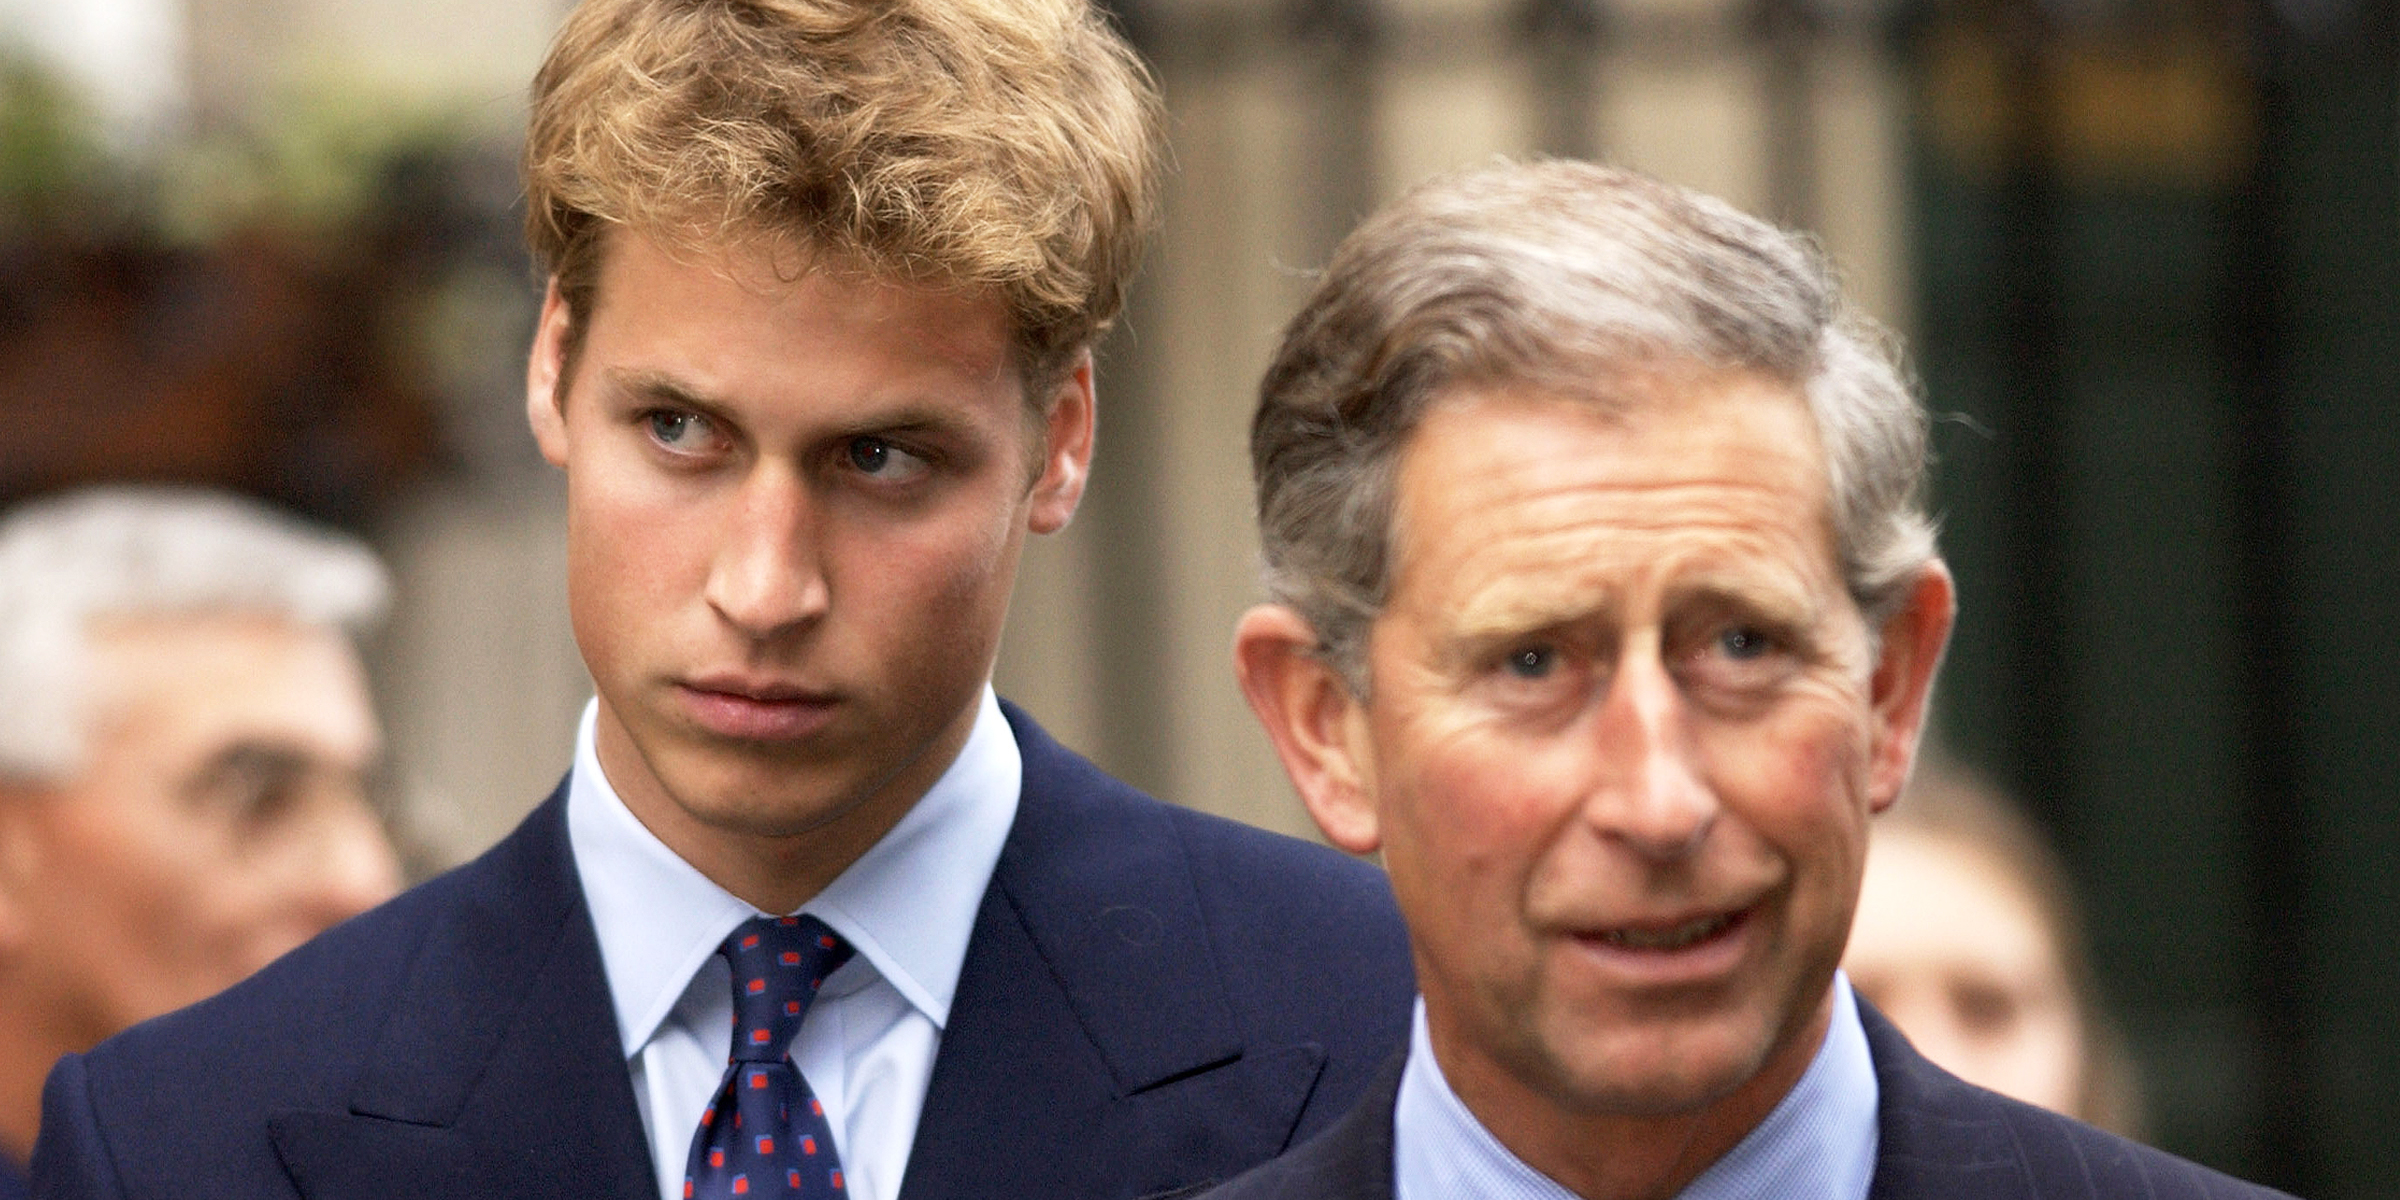 Prince William and King Charles III | Source: Getty Images